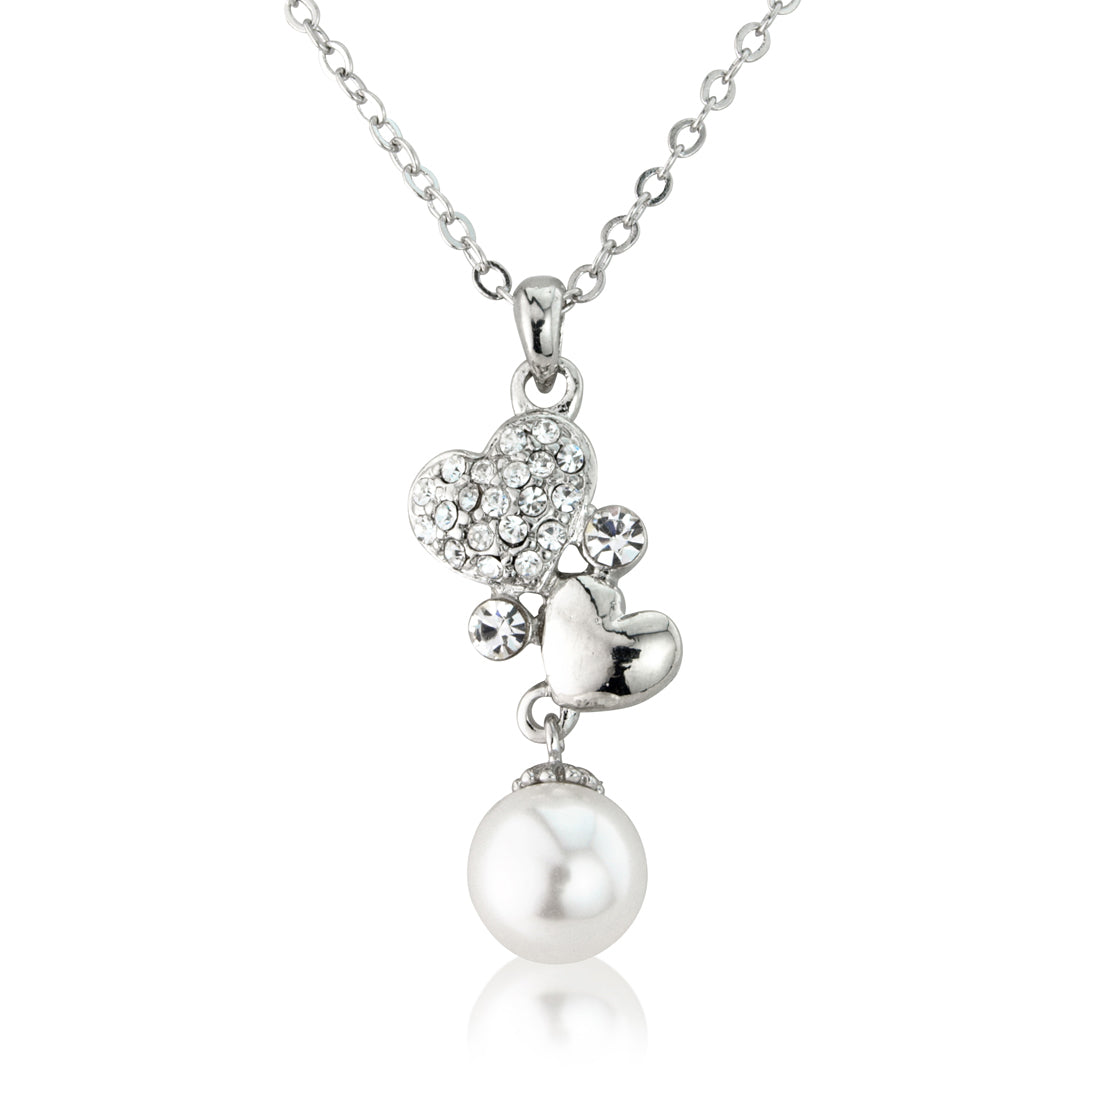 Pearls and Love Hearts Bridal Pendant